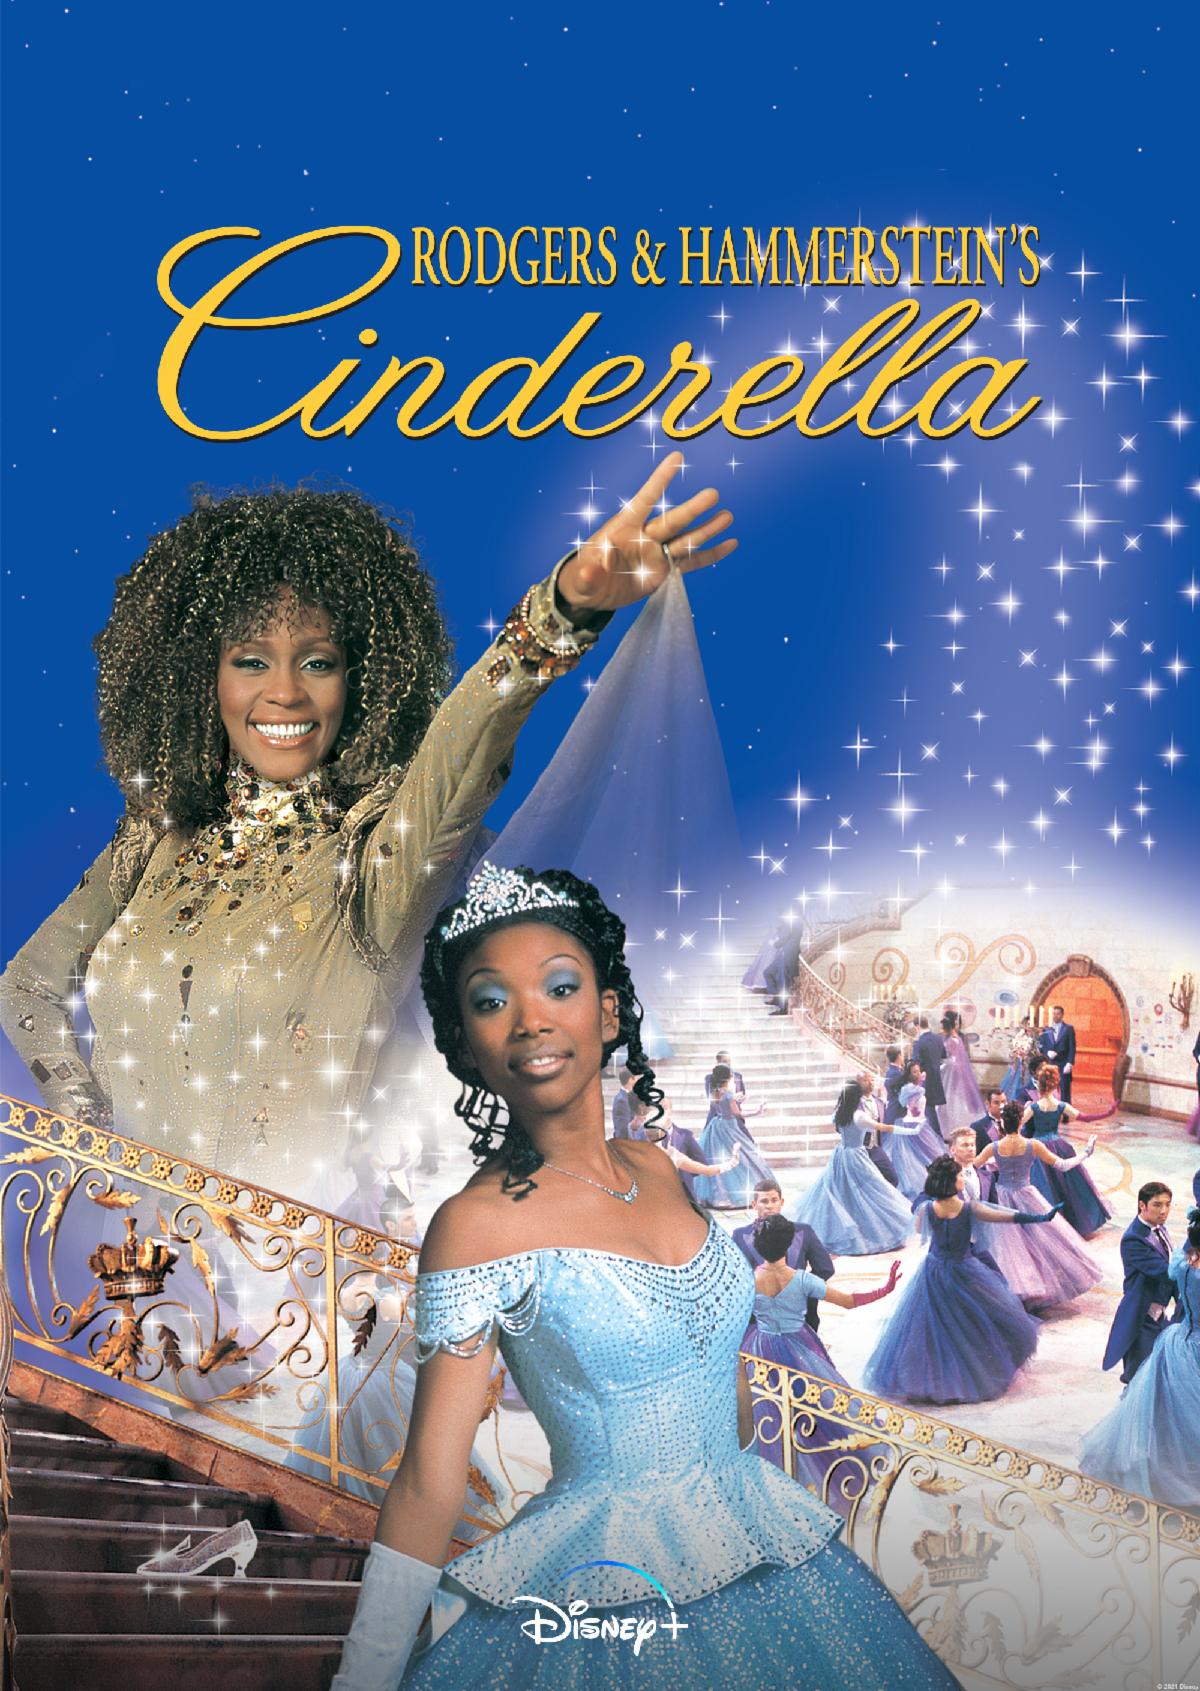 Rodgers and Hammerstein’s Cinderella Streaming on Disney+ February 12th